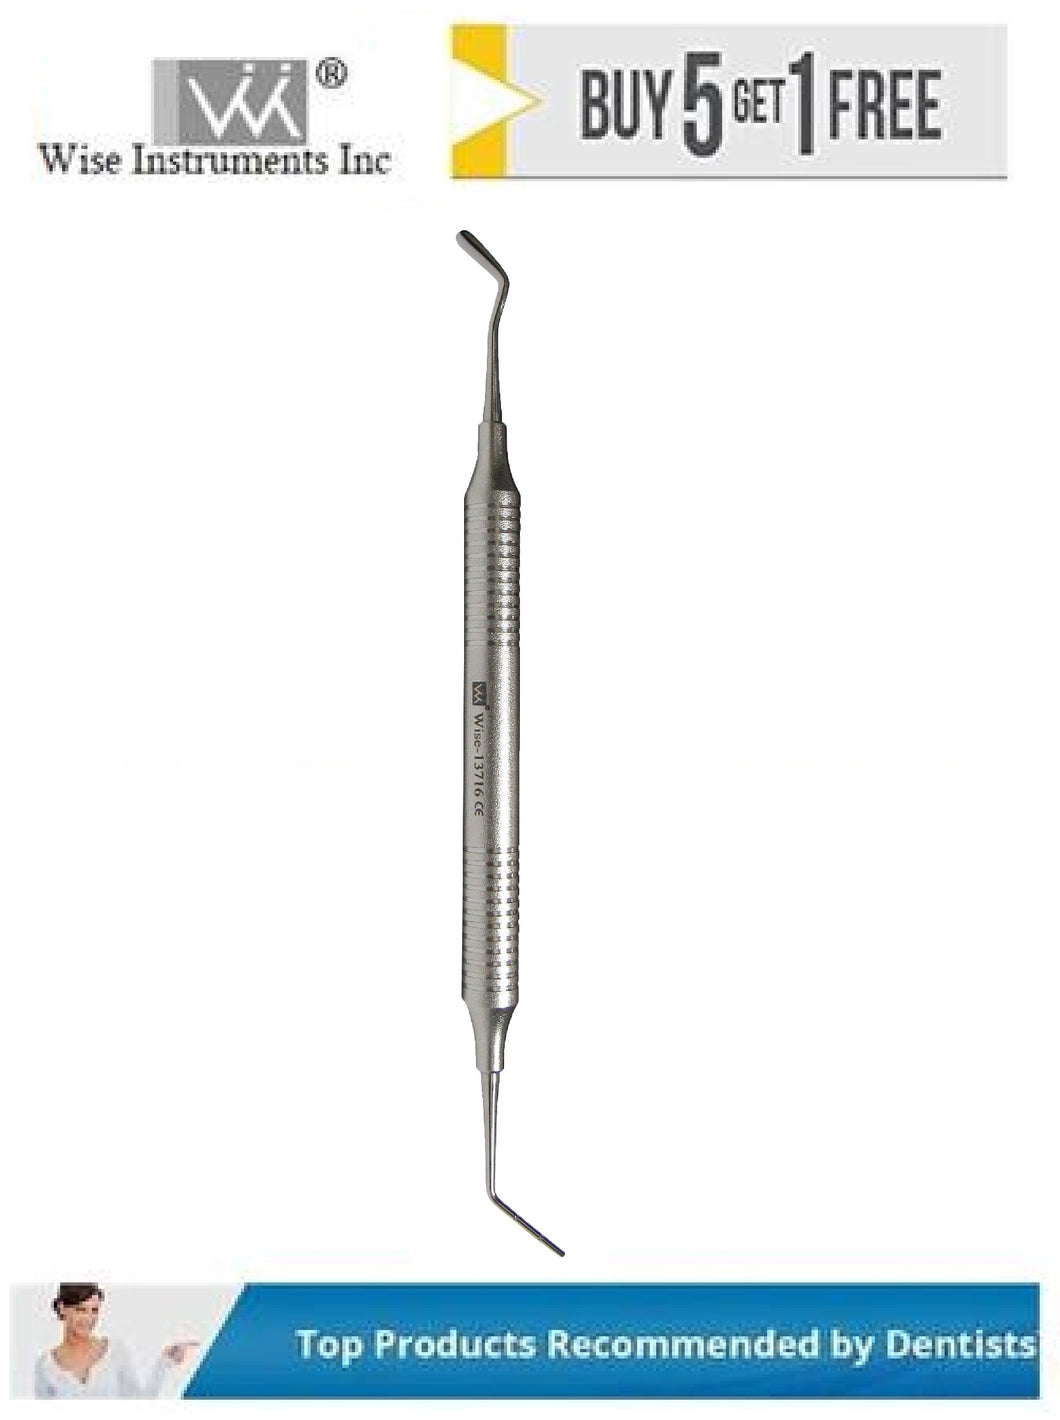 Glick 1 (Our Most Popular Root Canal Plugger)